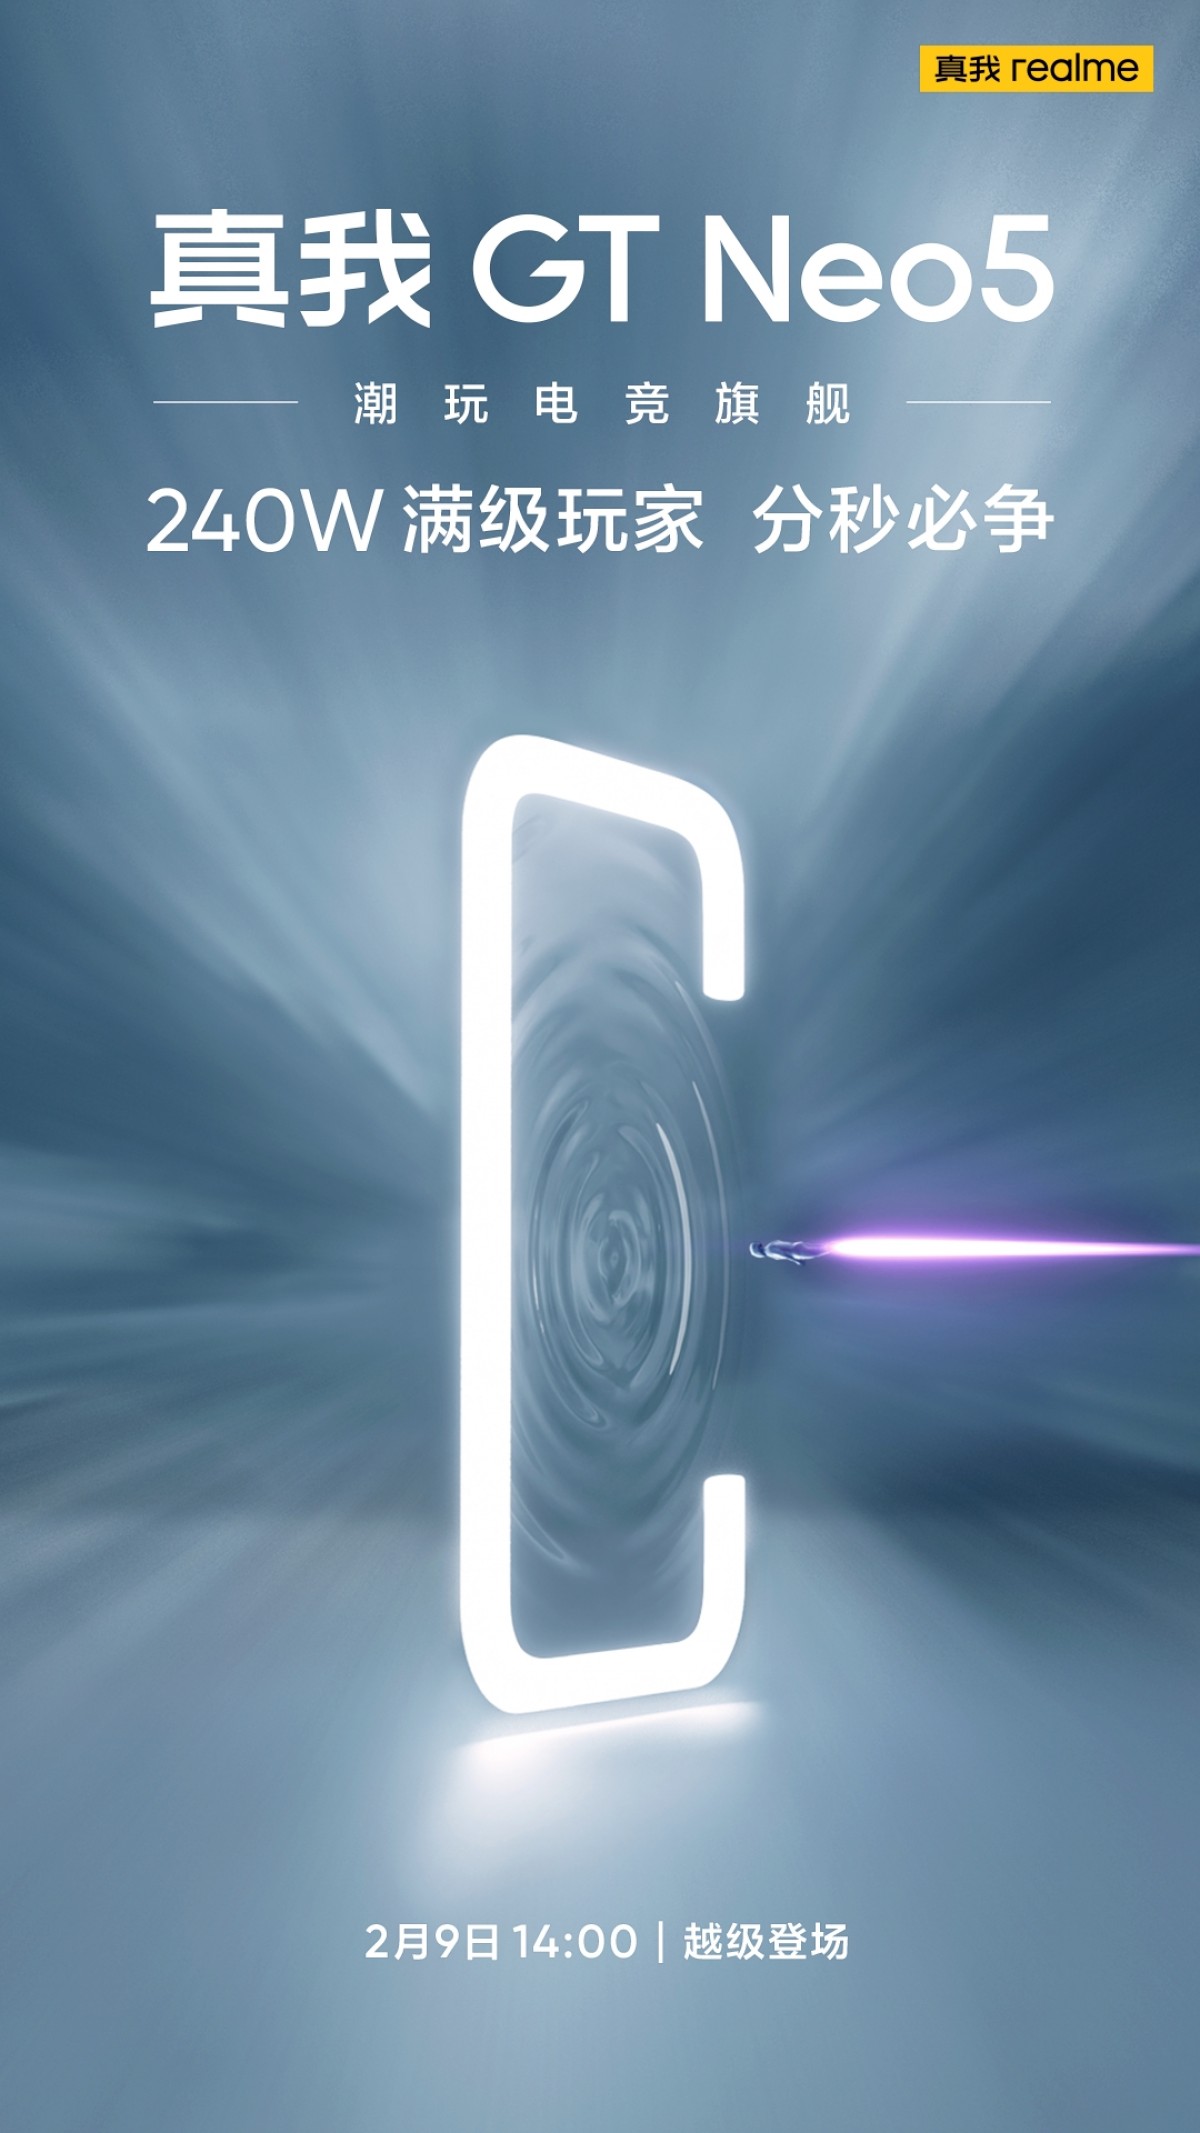 Realme GT Neo5 with 240W charging is arriving on February 9